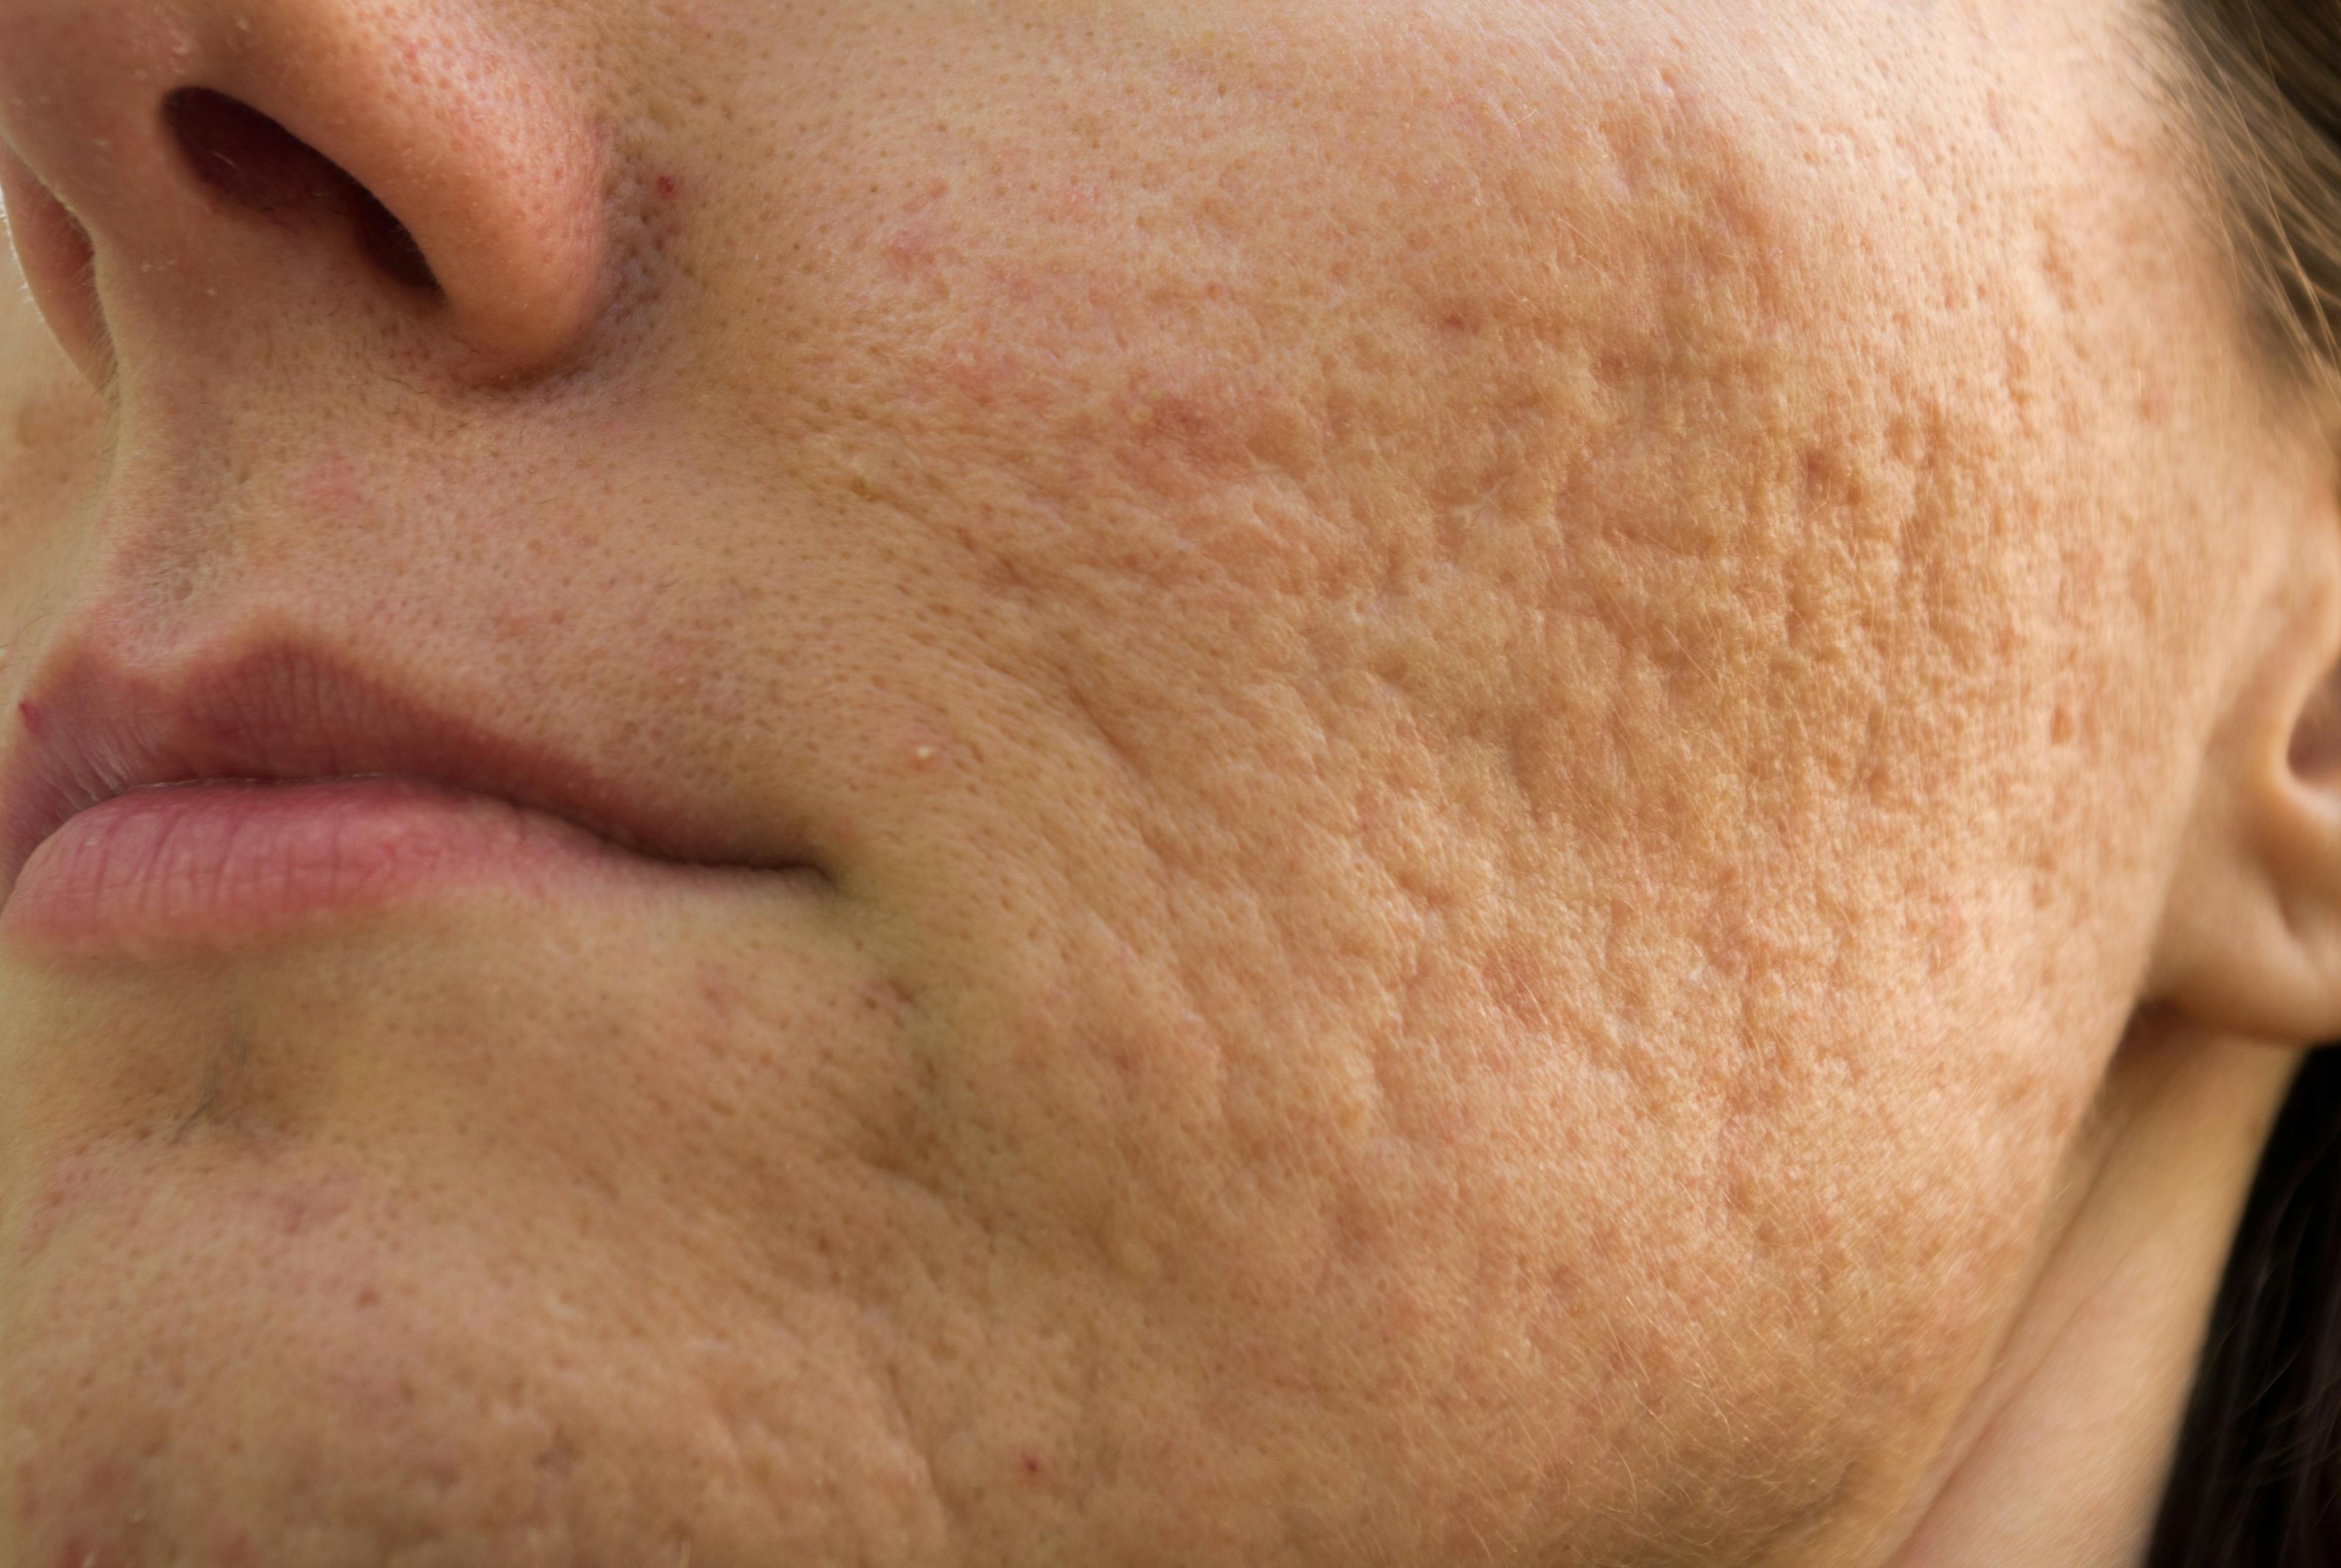 Acne scarring on the cheek